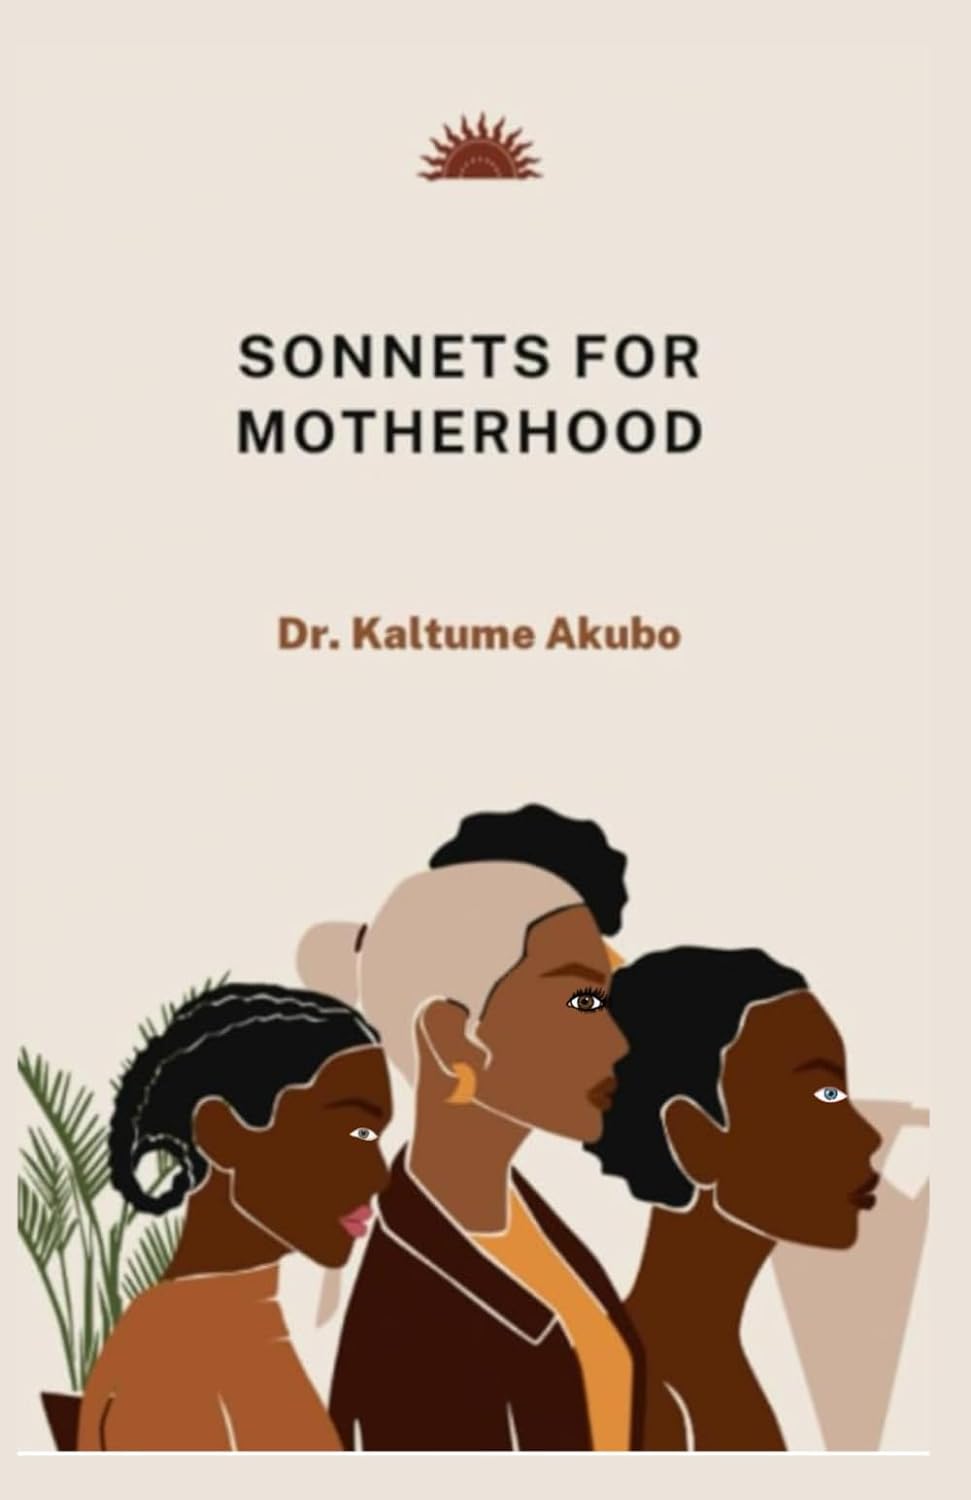 You are currently viewing Celebration of Motherhood – A Review of Sonnets for Motherhood